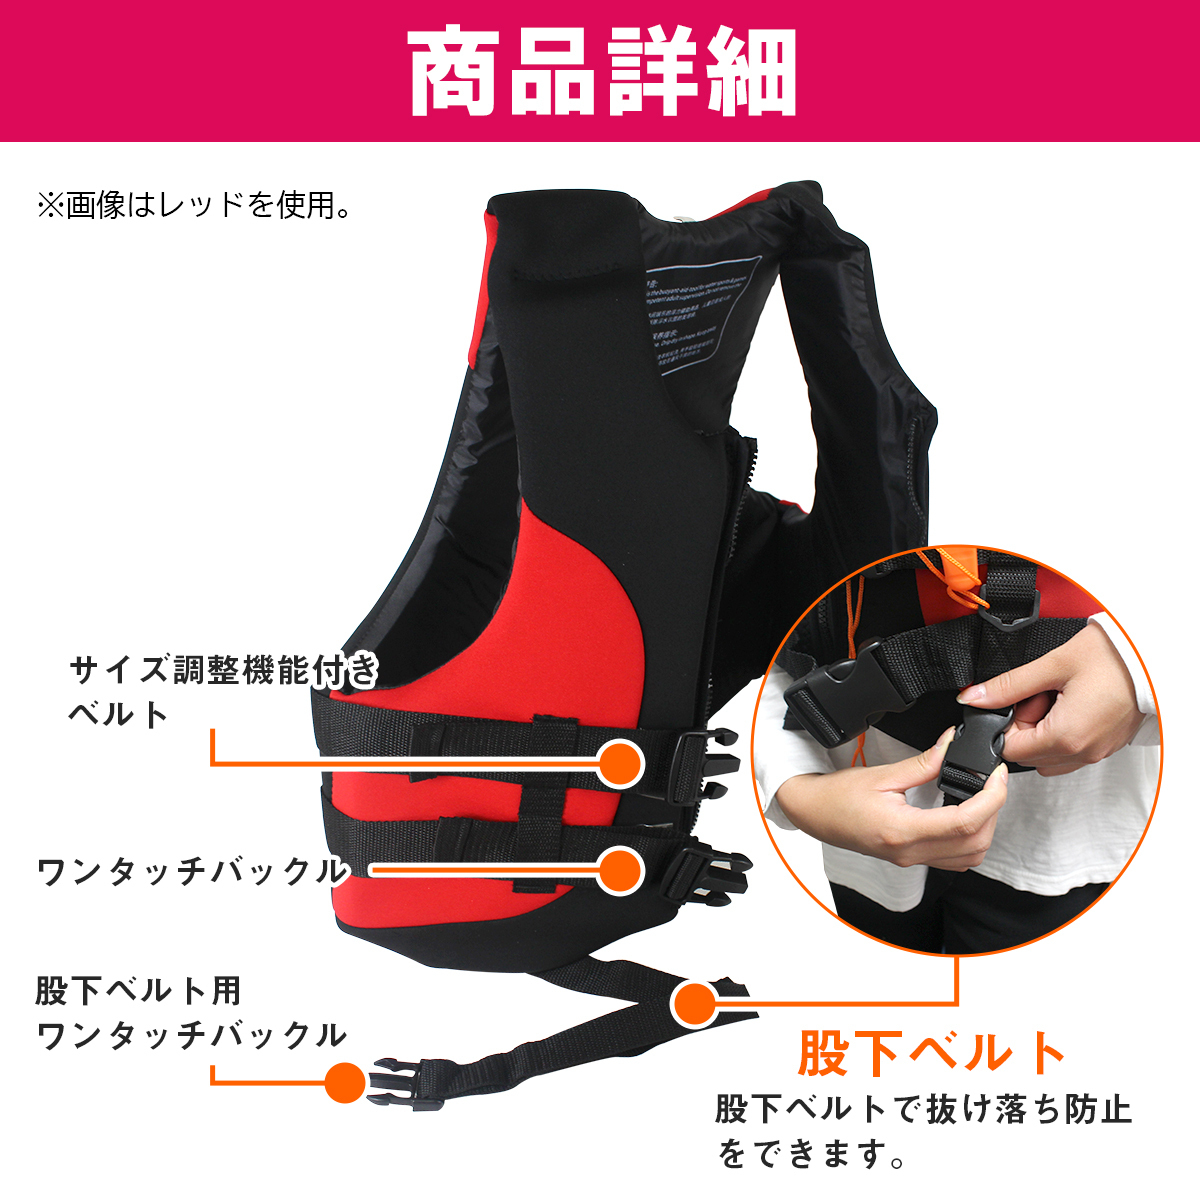  floating the best ( pipe attaching ) life jacket XXL size : dress length 53cmx width of a garment 52cmx thickness 6cm corresponding weight :75kg~85kg color : blue life jacket 